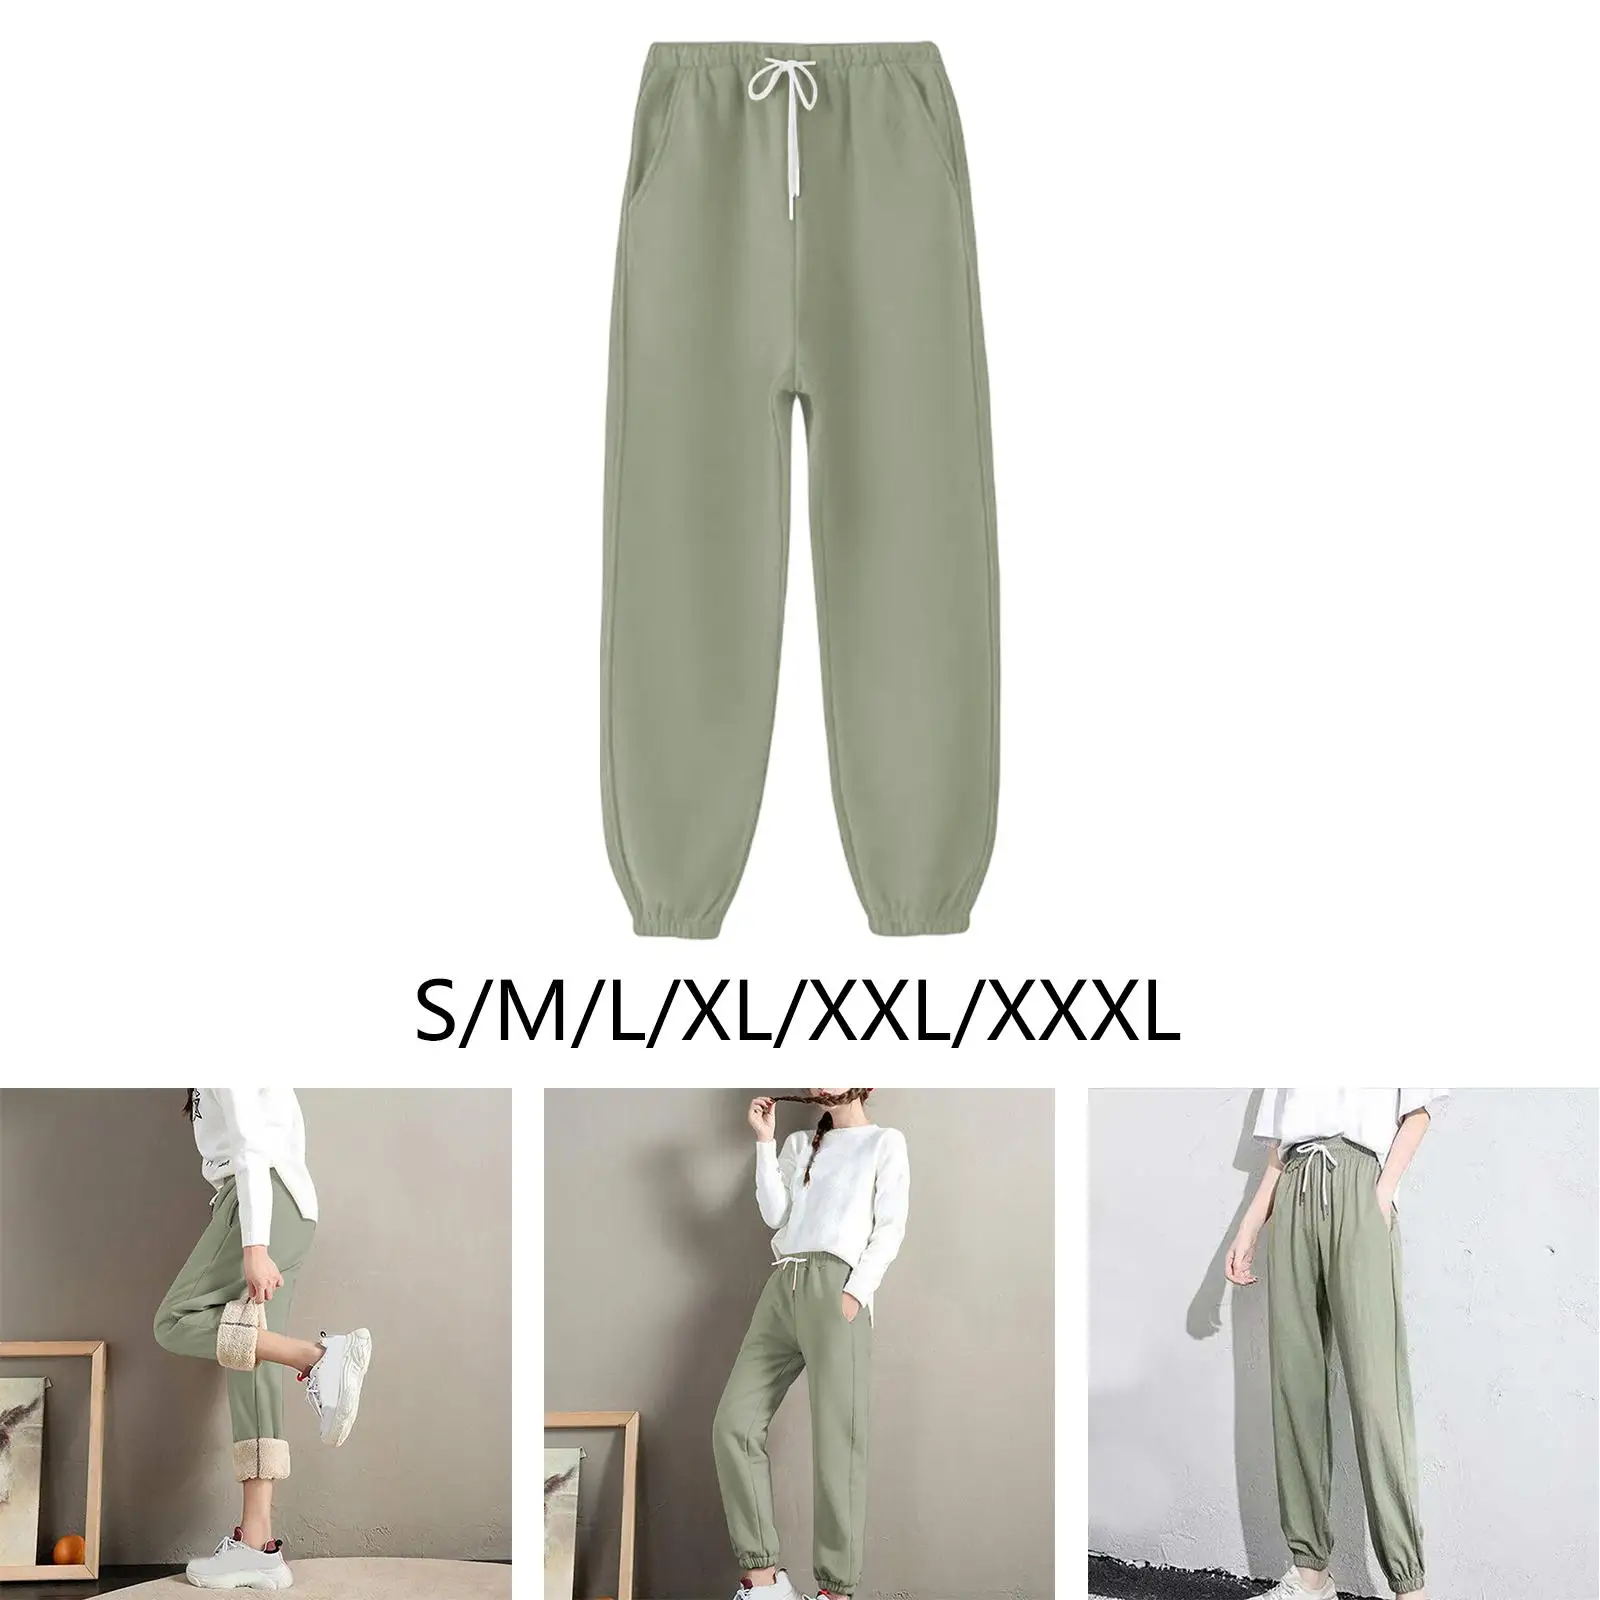 Plush Lined Sweatpants, Casual Harem Casual Trousers Jogger Pants for Sports Spring